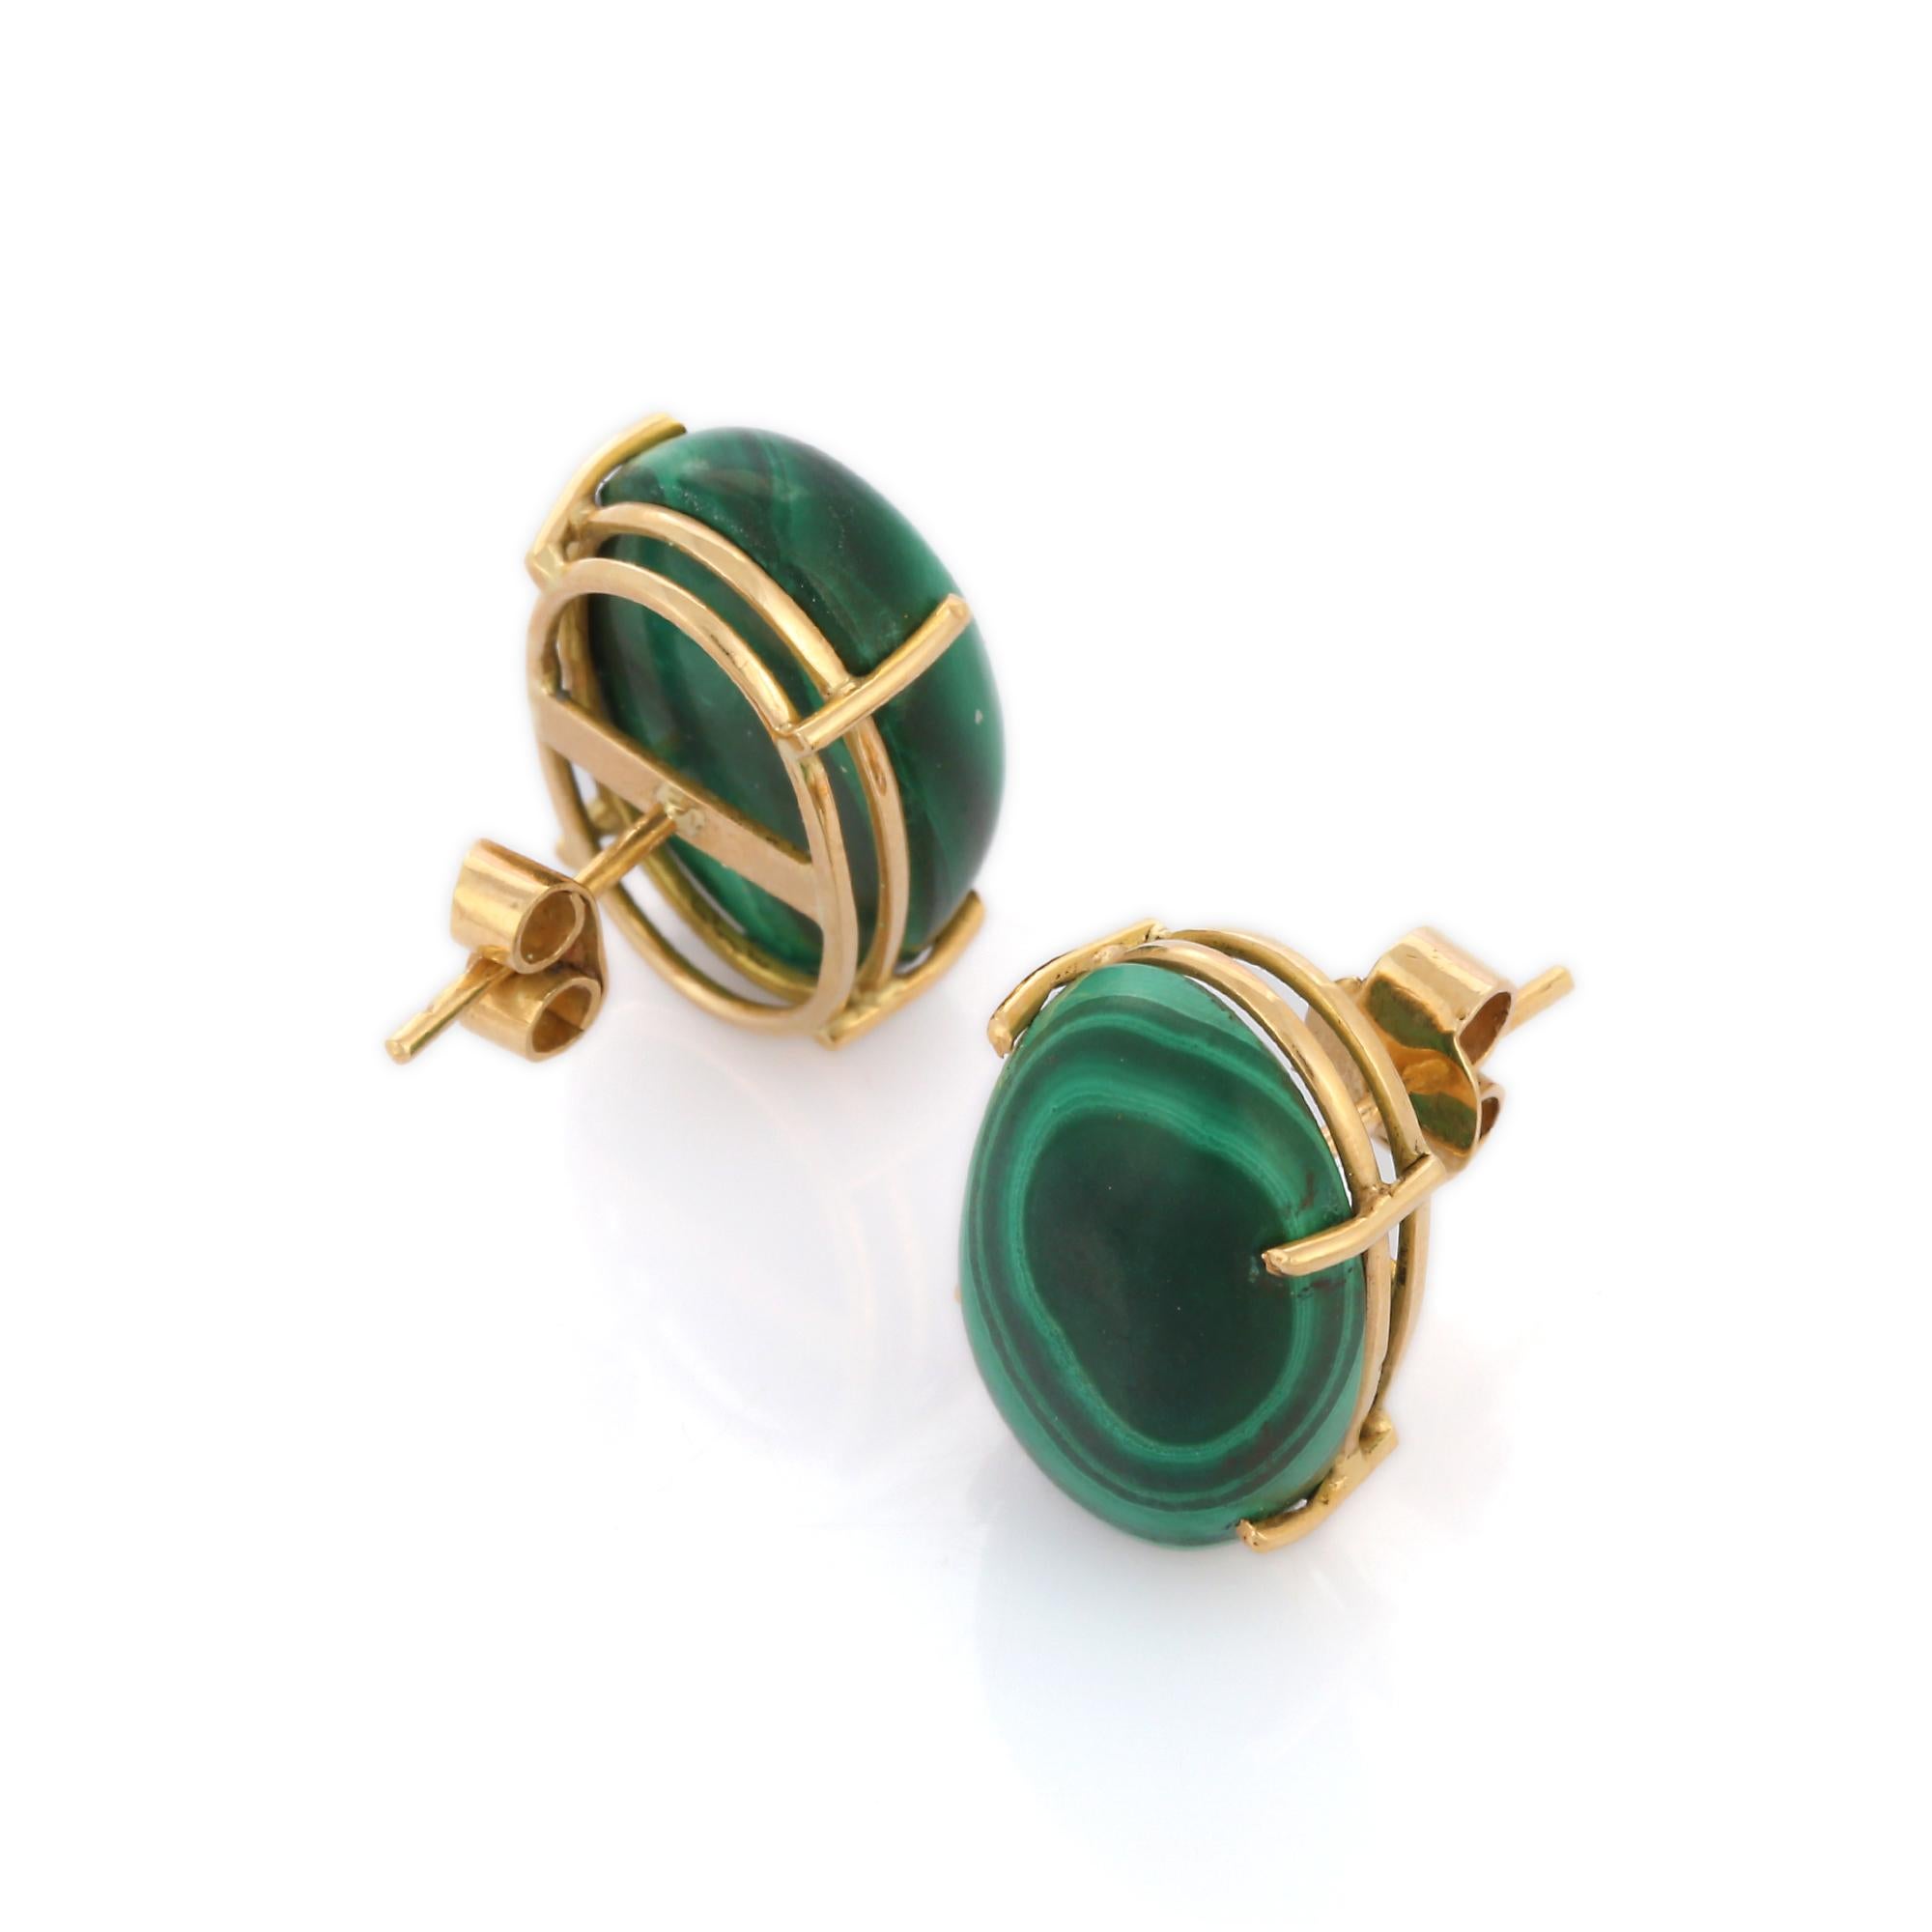 Studs create a subtle beauty while showcasing the colors of the natural precious gemstones.

Oval cut solitaire malachite studs in 18K gold. Embrace your look with these stunning pair of earrings suitable for any occasion to complete your